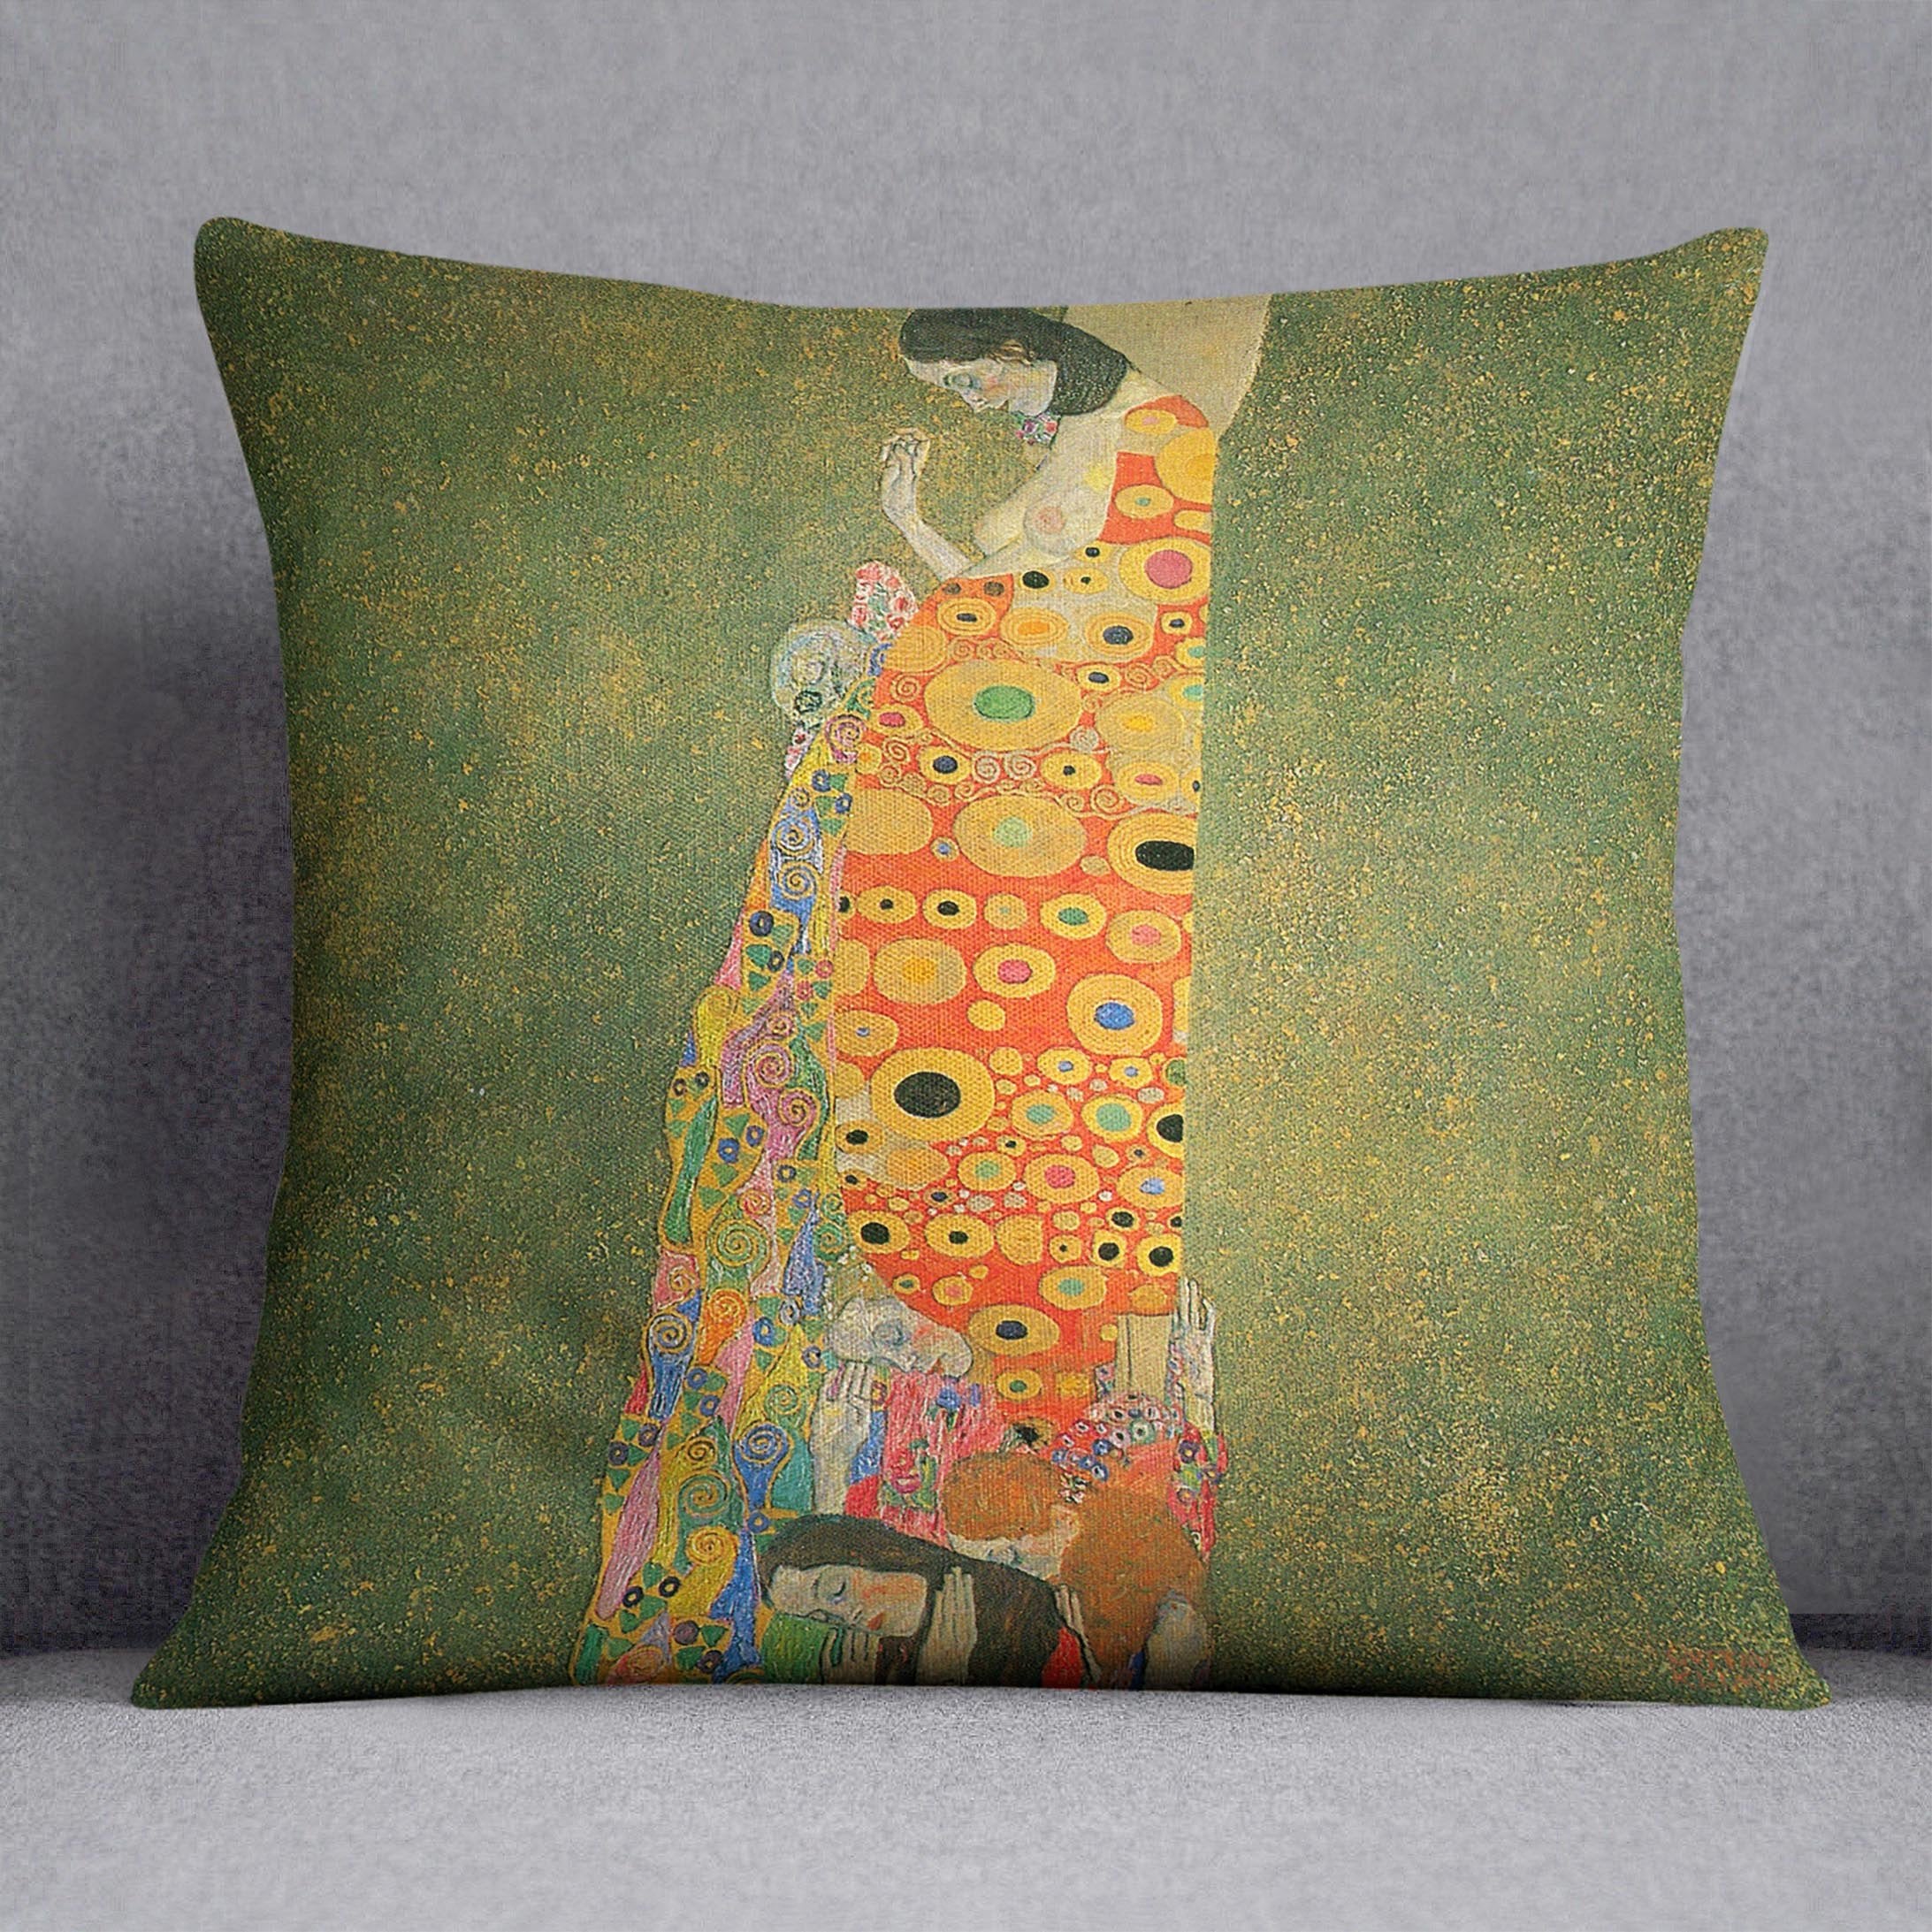 Abandoned Hope by Klimt Throw Pillow